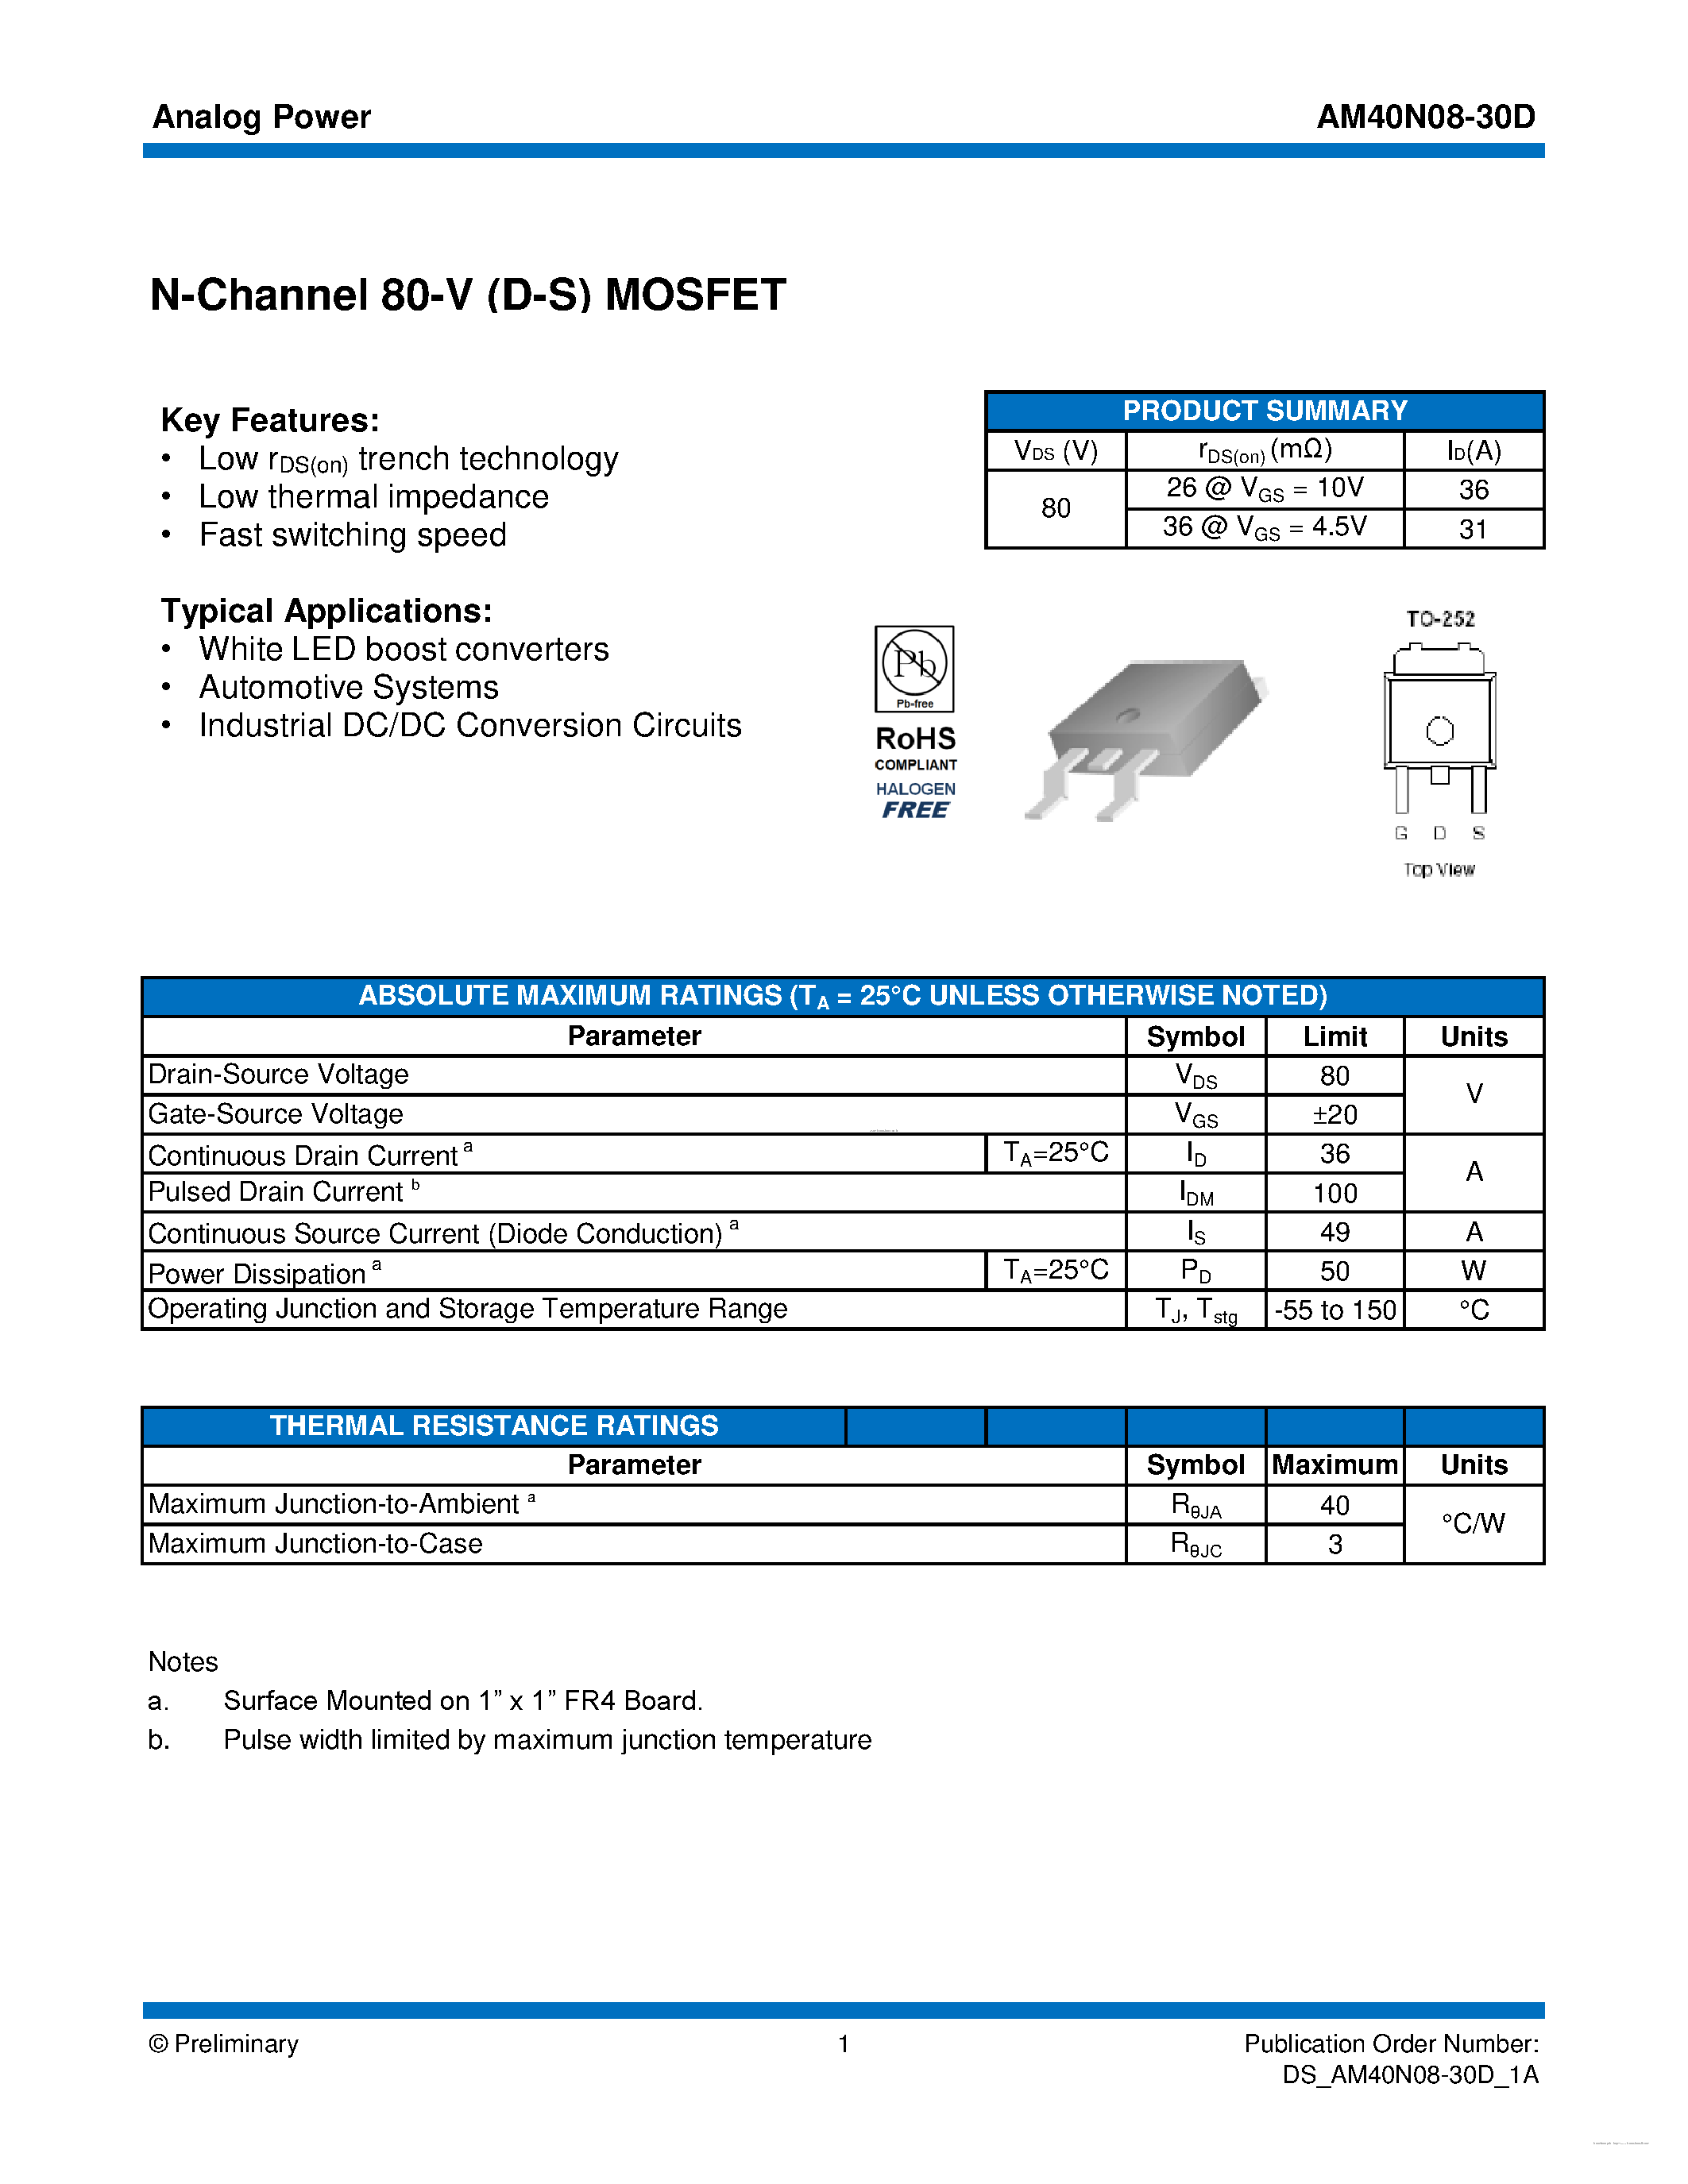 Datasheet AM40N08-30D - MOSFET page 1